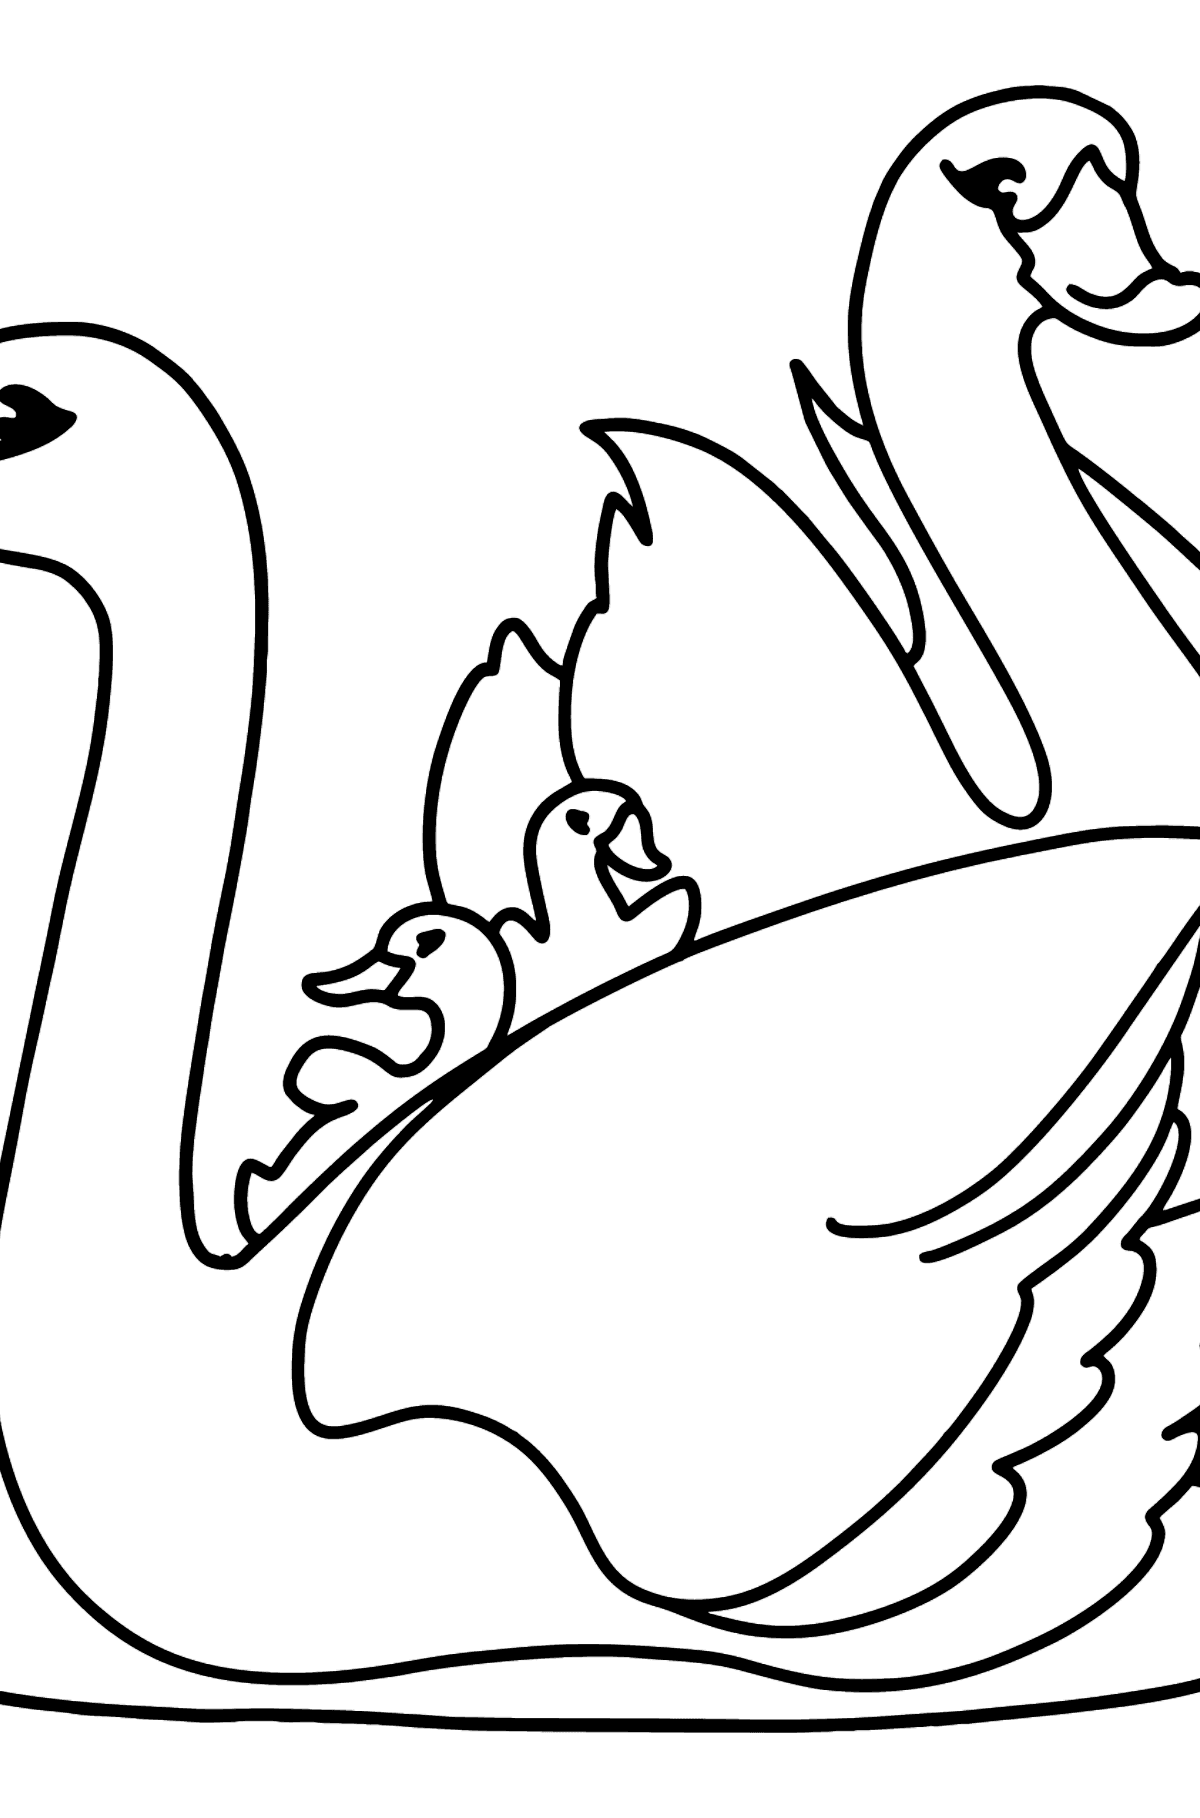 White Swans coloring page - Coloring Pages for Kids